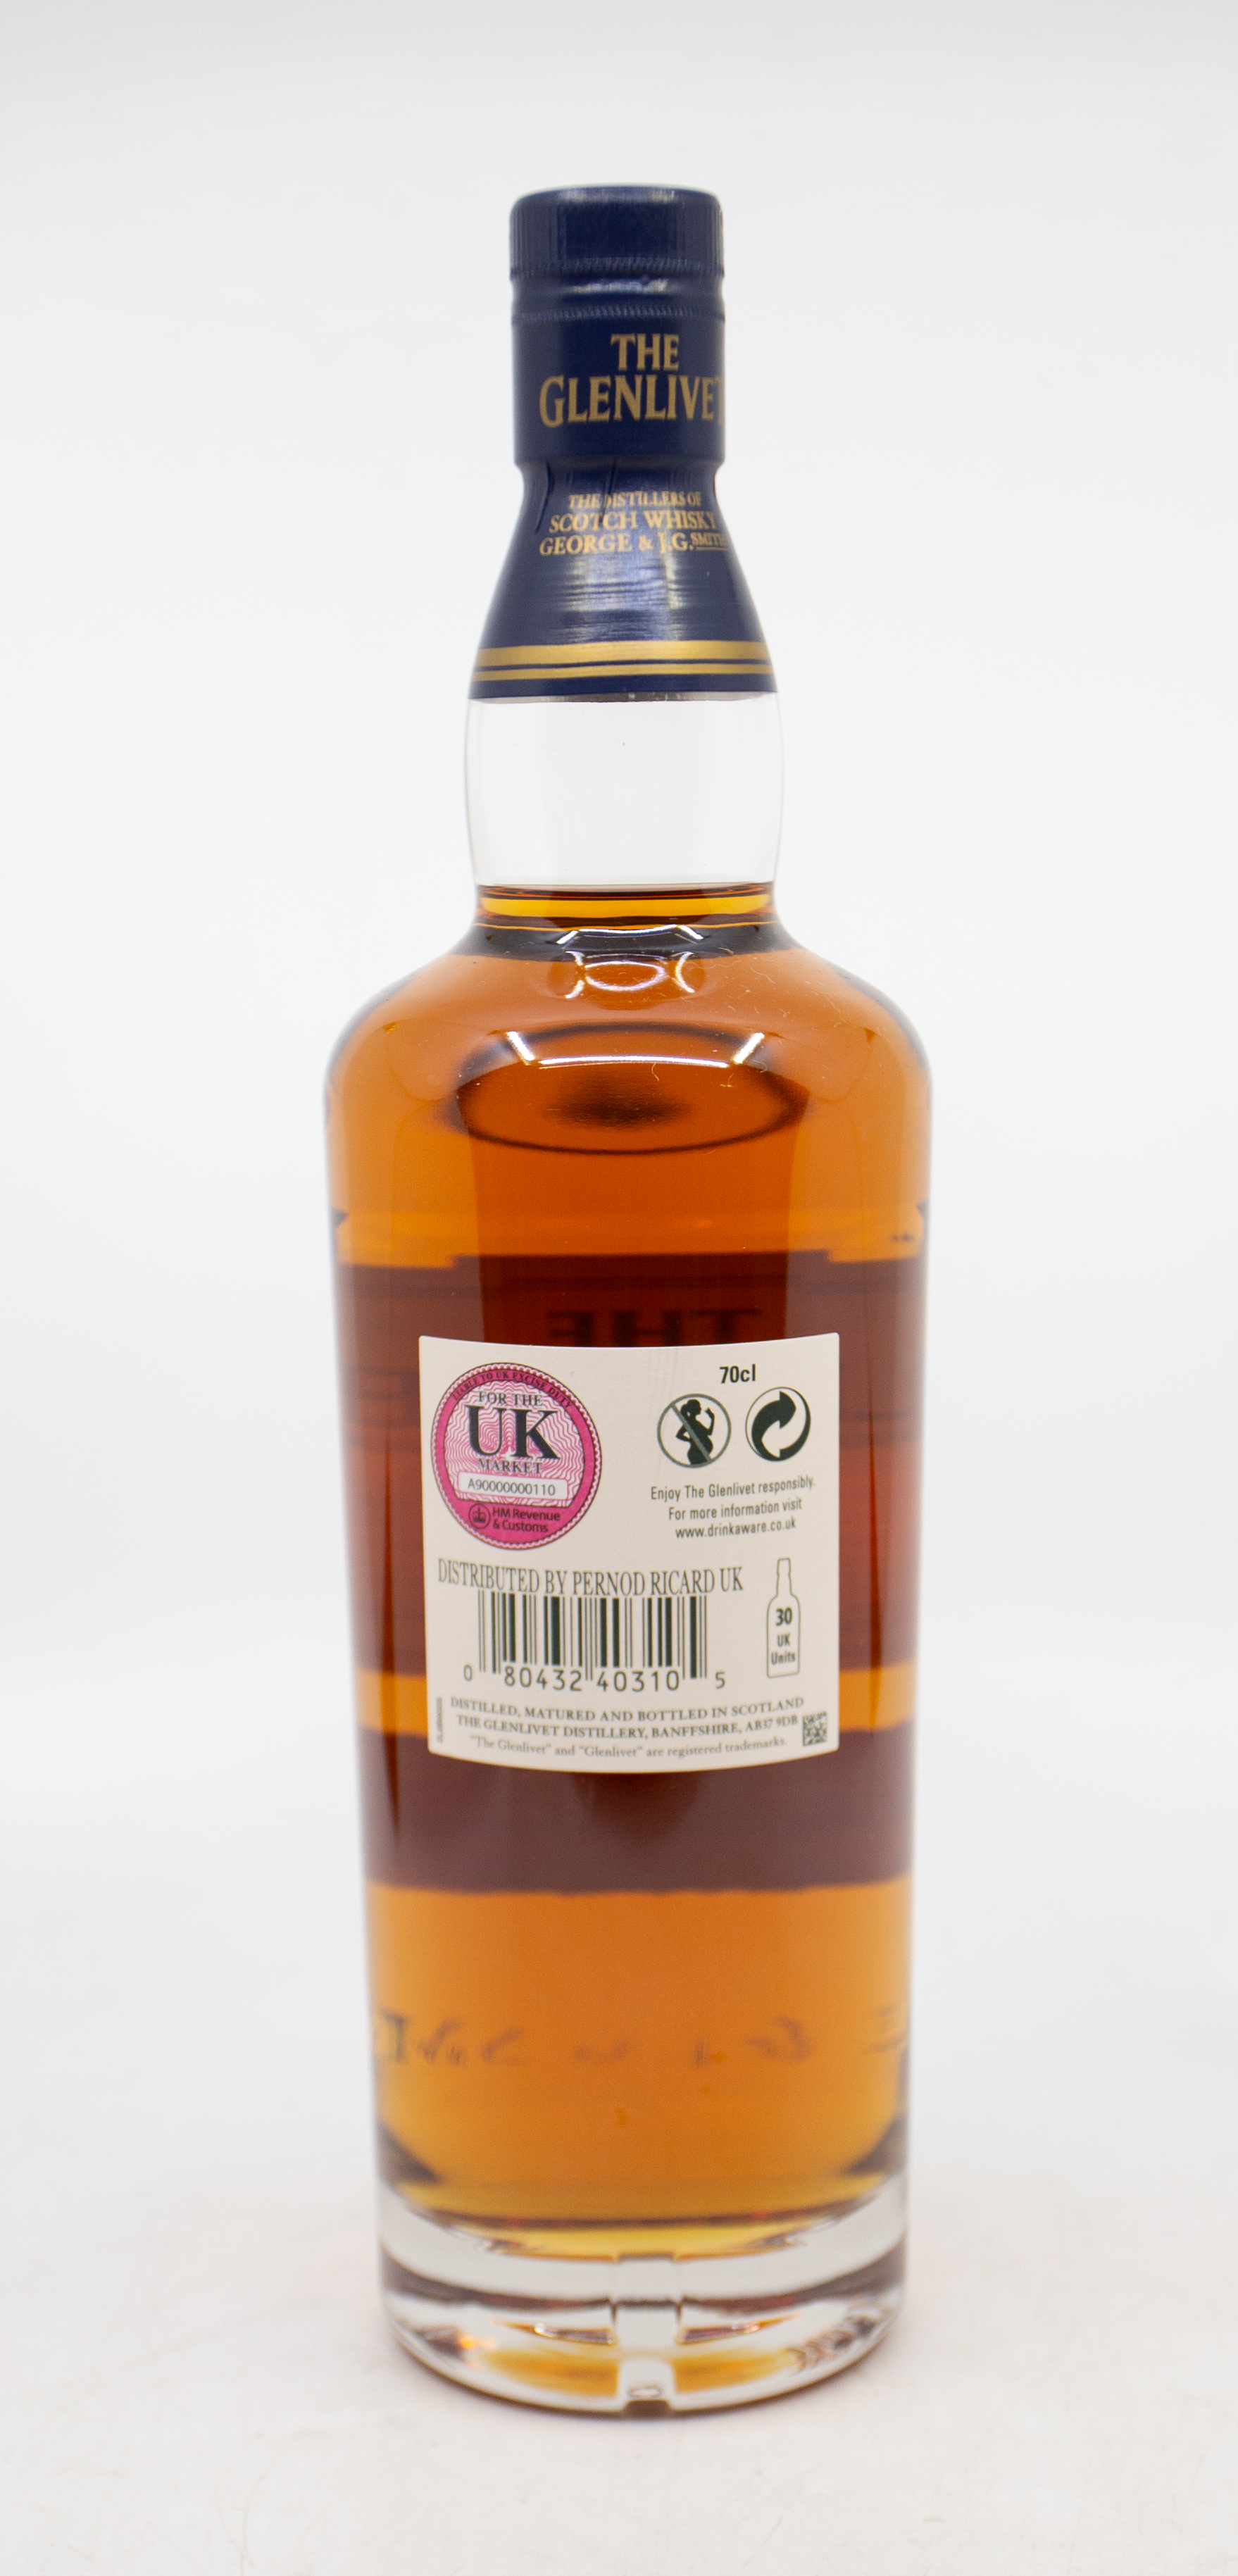 The Glenlivet, 18 years of age, single malt Scotch whisky, 70 cl, 43% alcohol, boxed (1) Box missing - Image 3 of 3